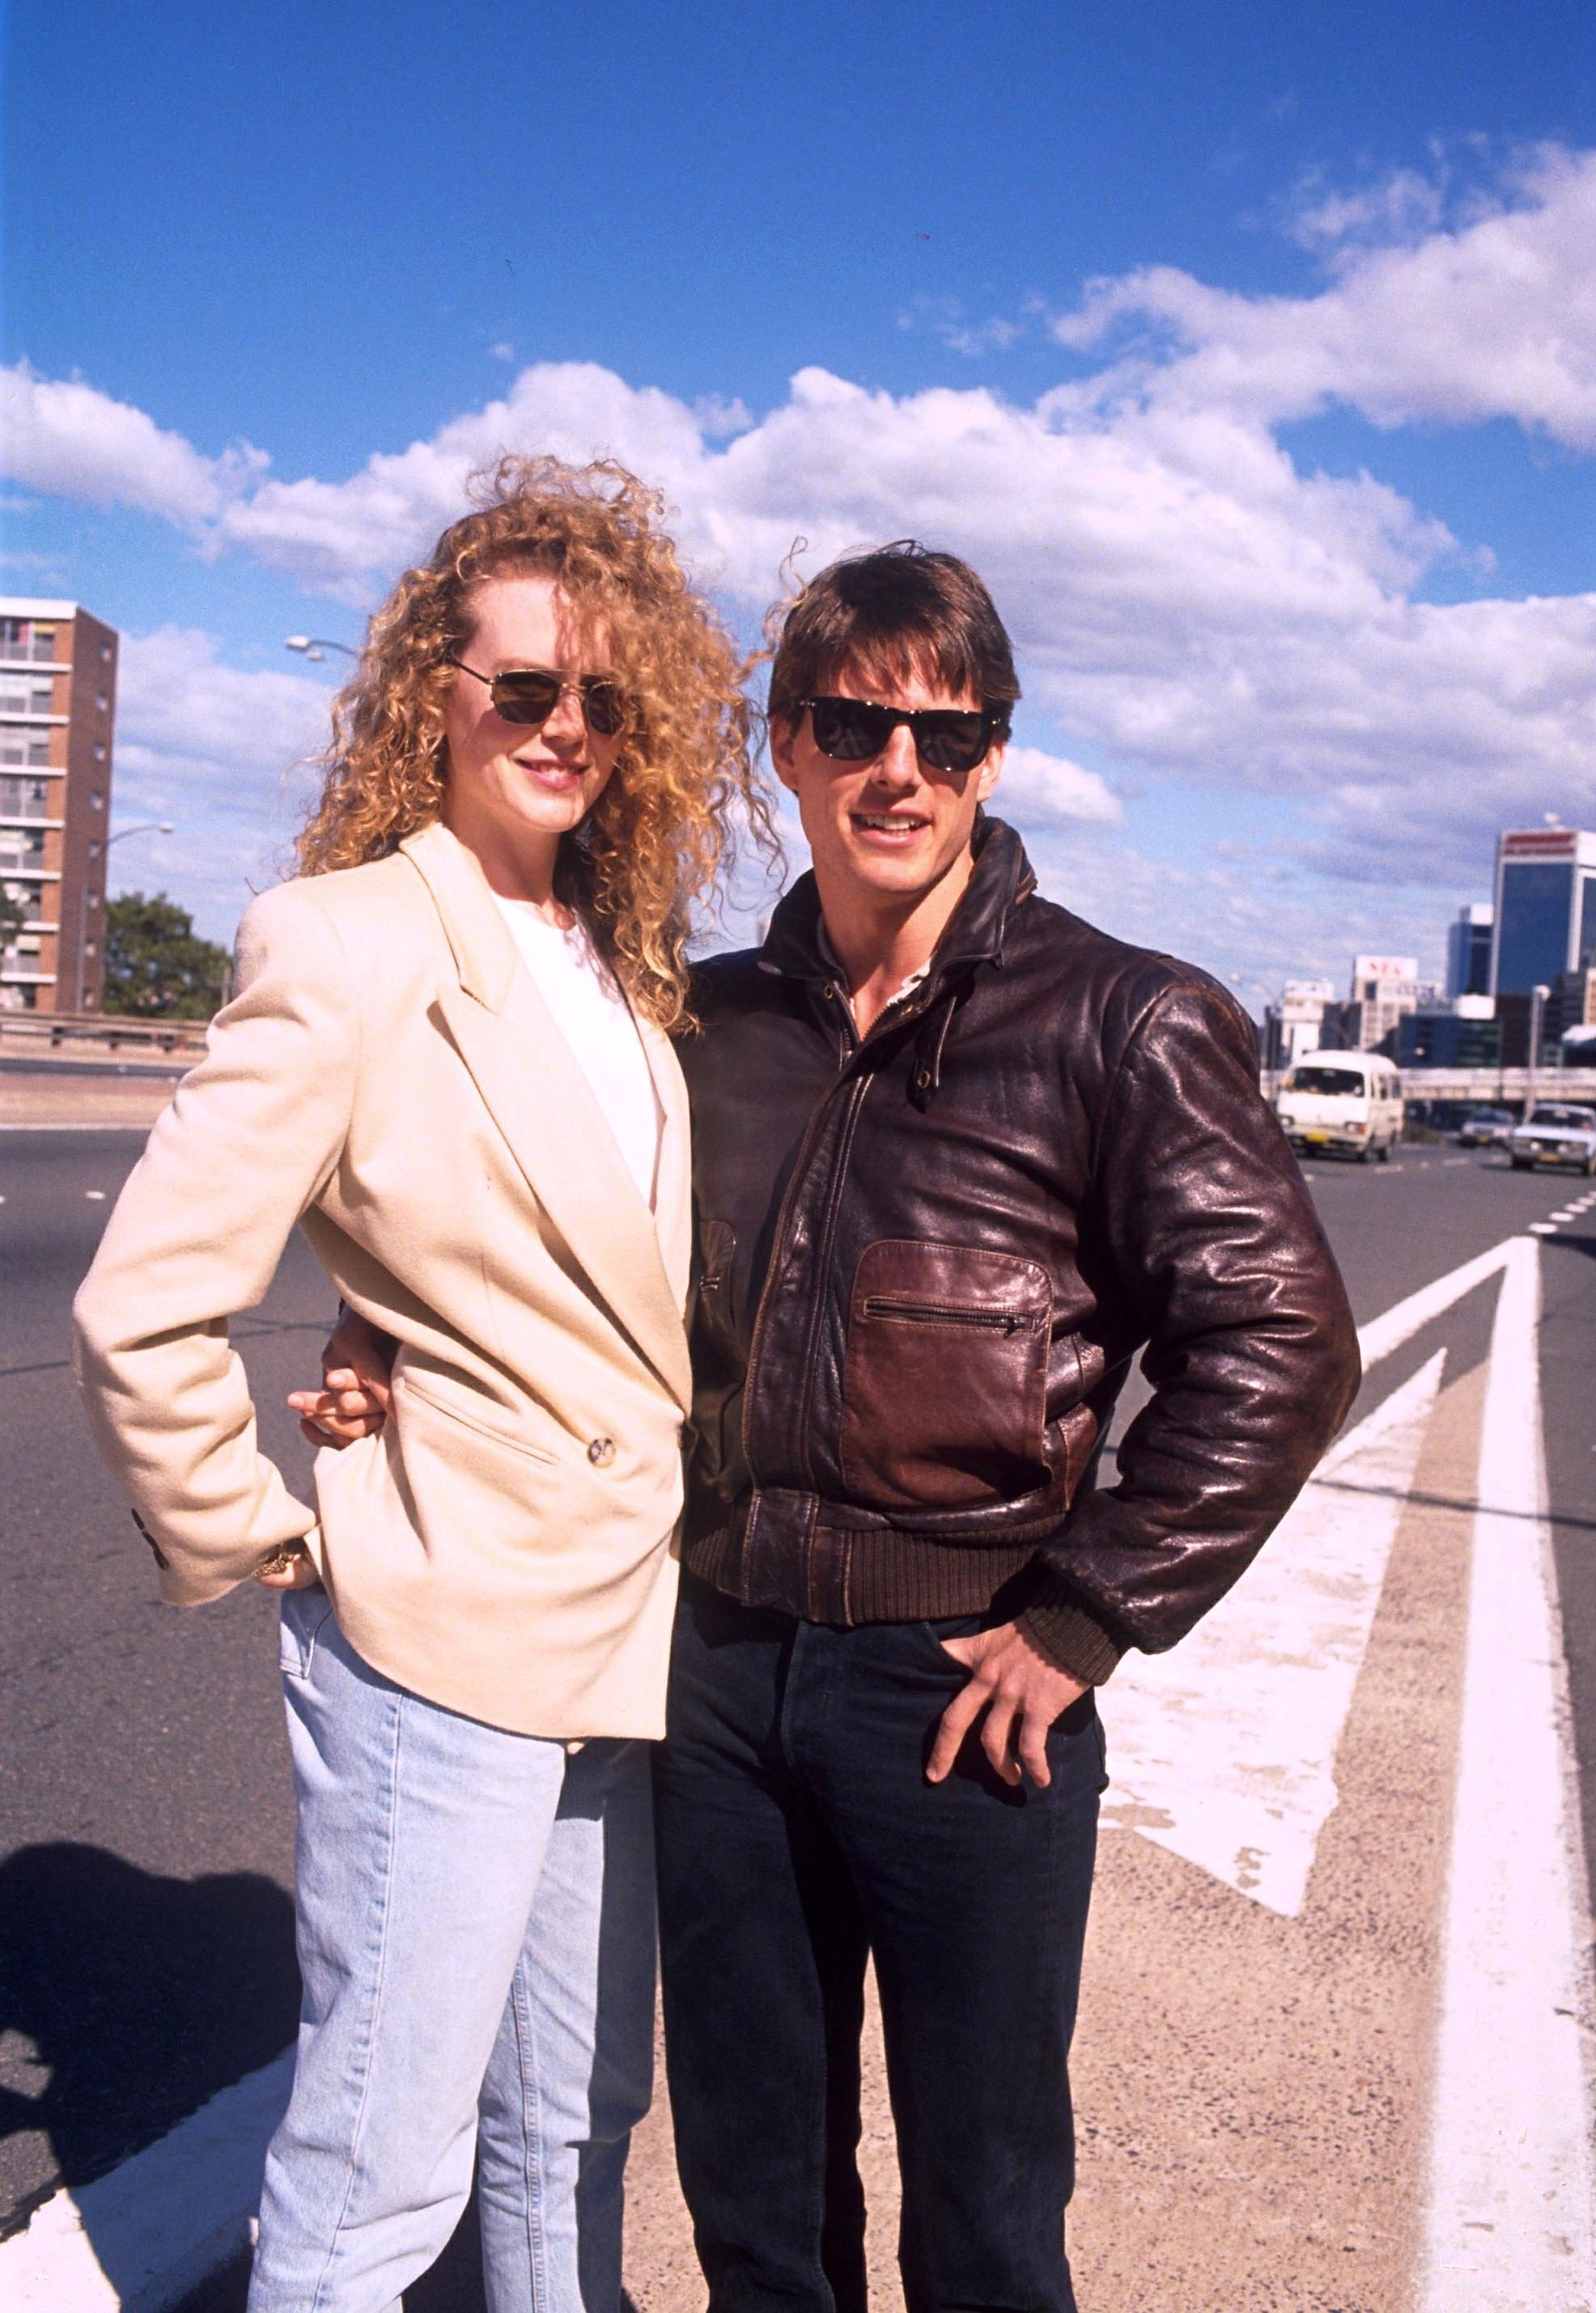 <p>In 1990, Tom Cruise and <a href="https://www.wonderwall.com/celebrity/profiles/overview/nicole-kidman-364.article">Nicole Kidman</a> grew close while shooting "Days of Thunder." The American movie star and the Australian actress, pictured here promoting the film in Sydney, soon began dating.</p>